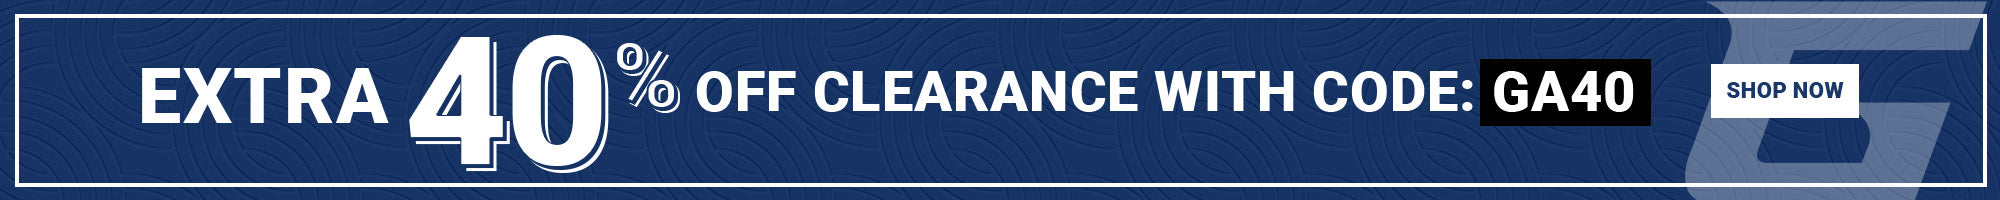 EXTRA 40% OFF CLEARANCE WITH CODE: GA40 - Shop Now